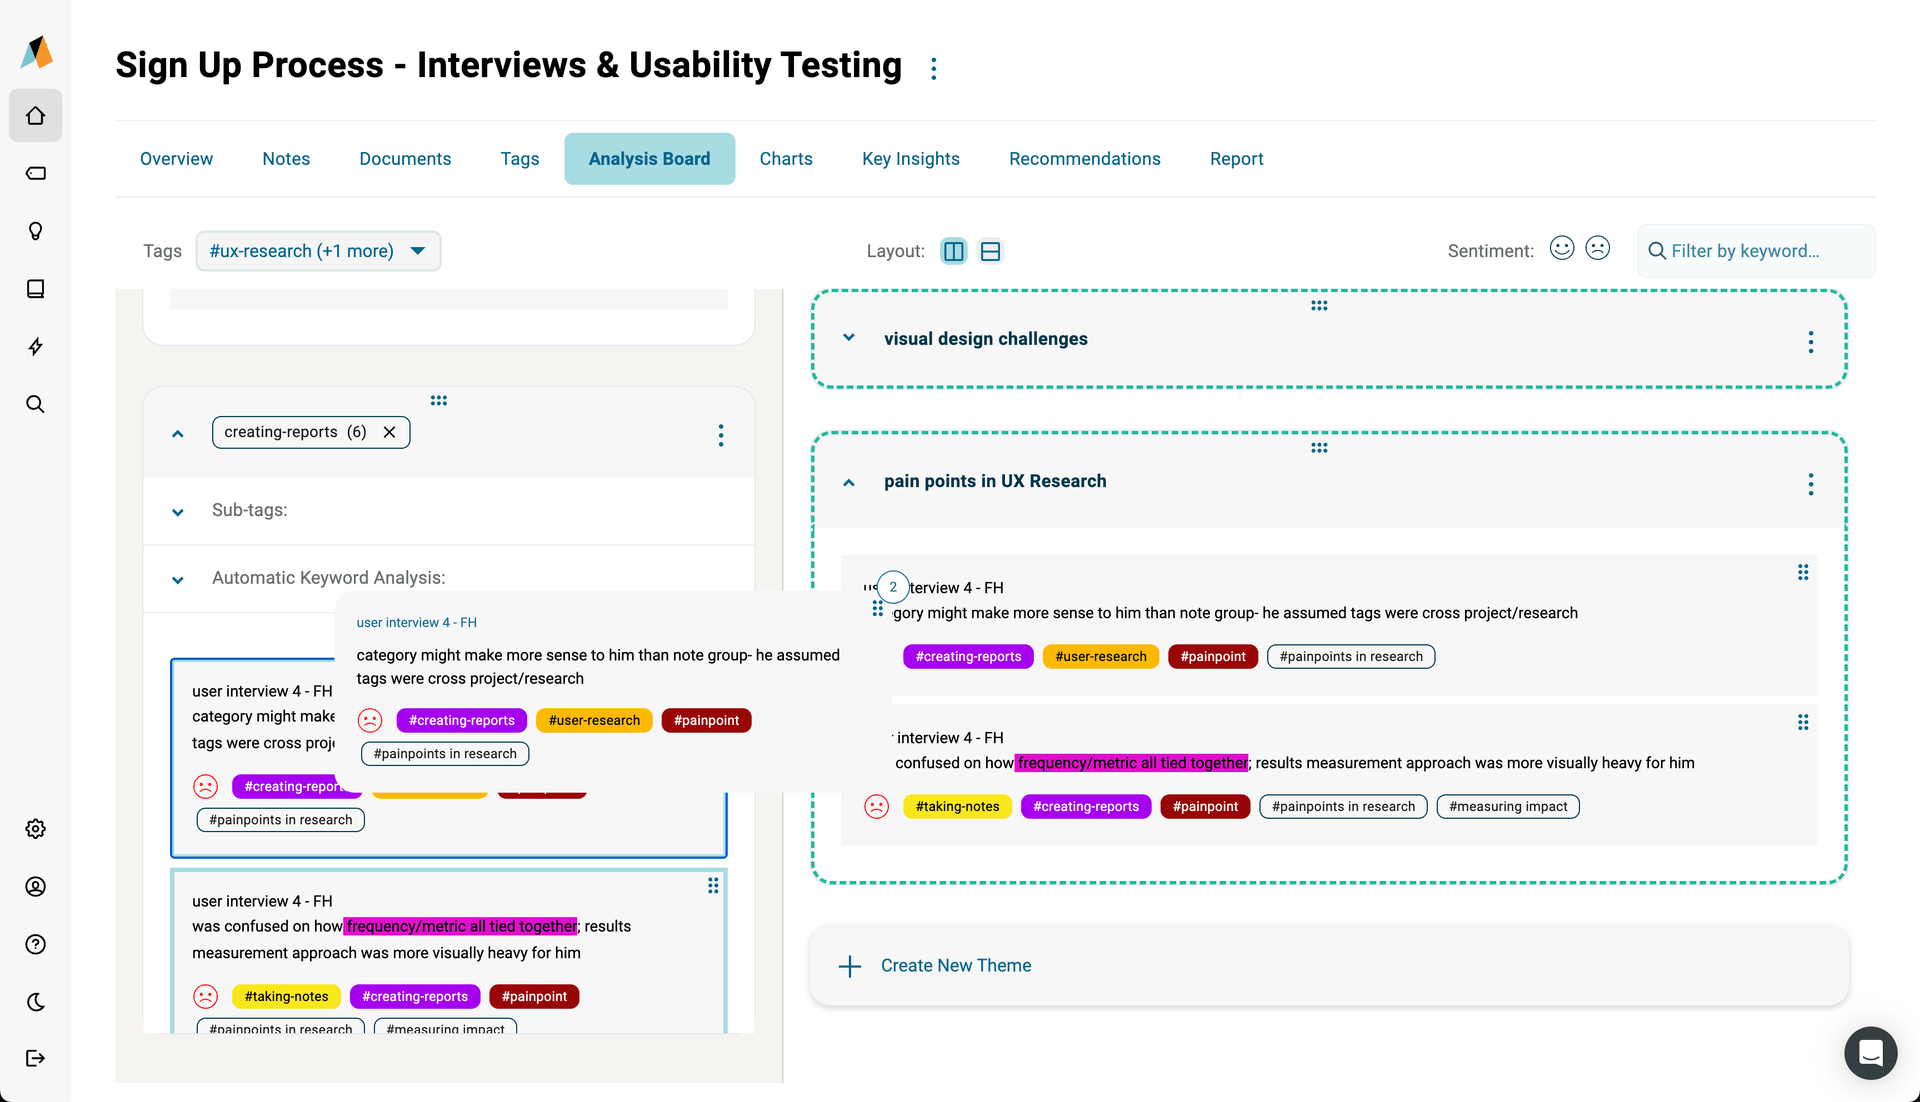 Analysis Board - affinity diagrams for UX Research